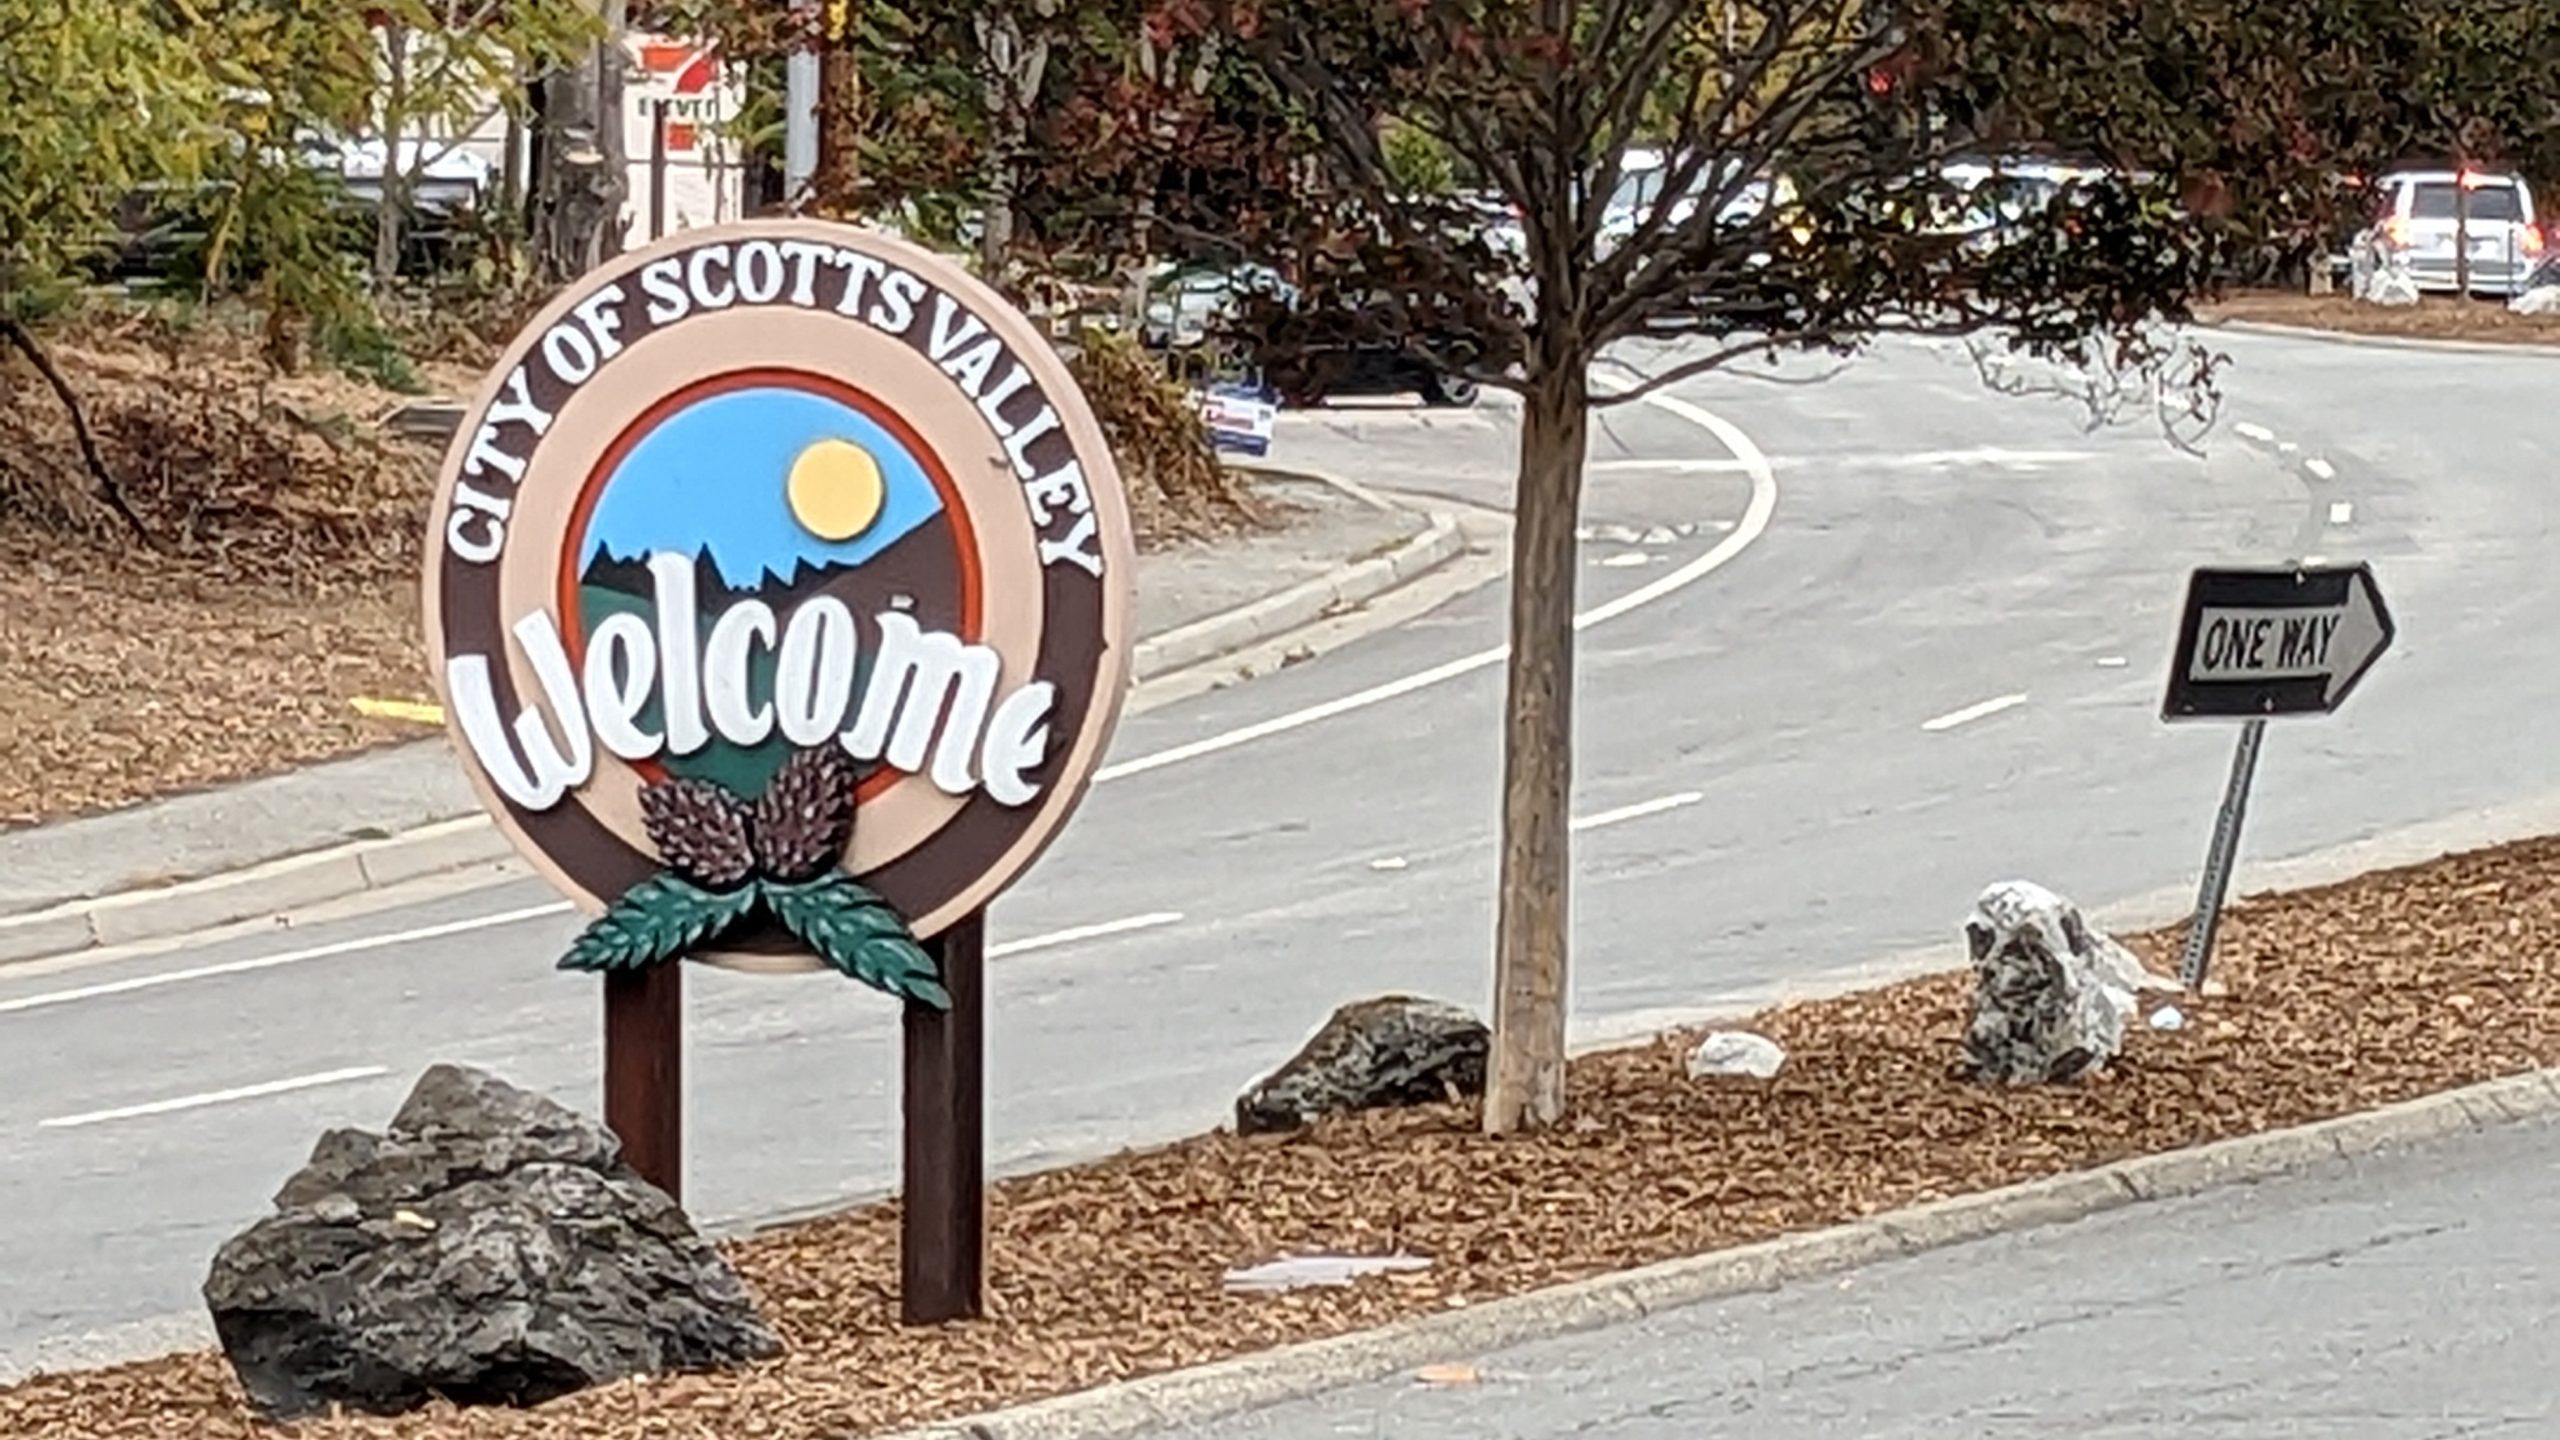 A sign on a road reads "City of Scotts Valley Welcome"